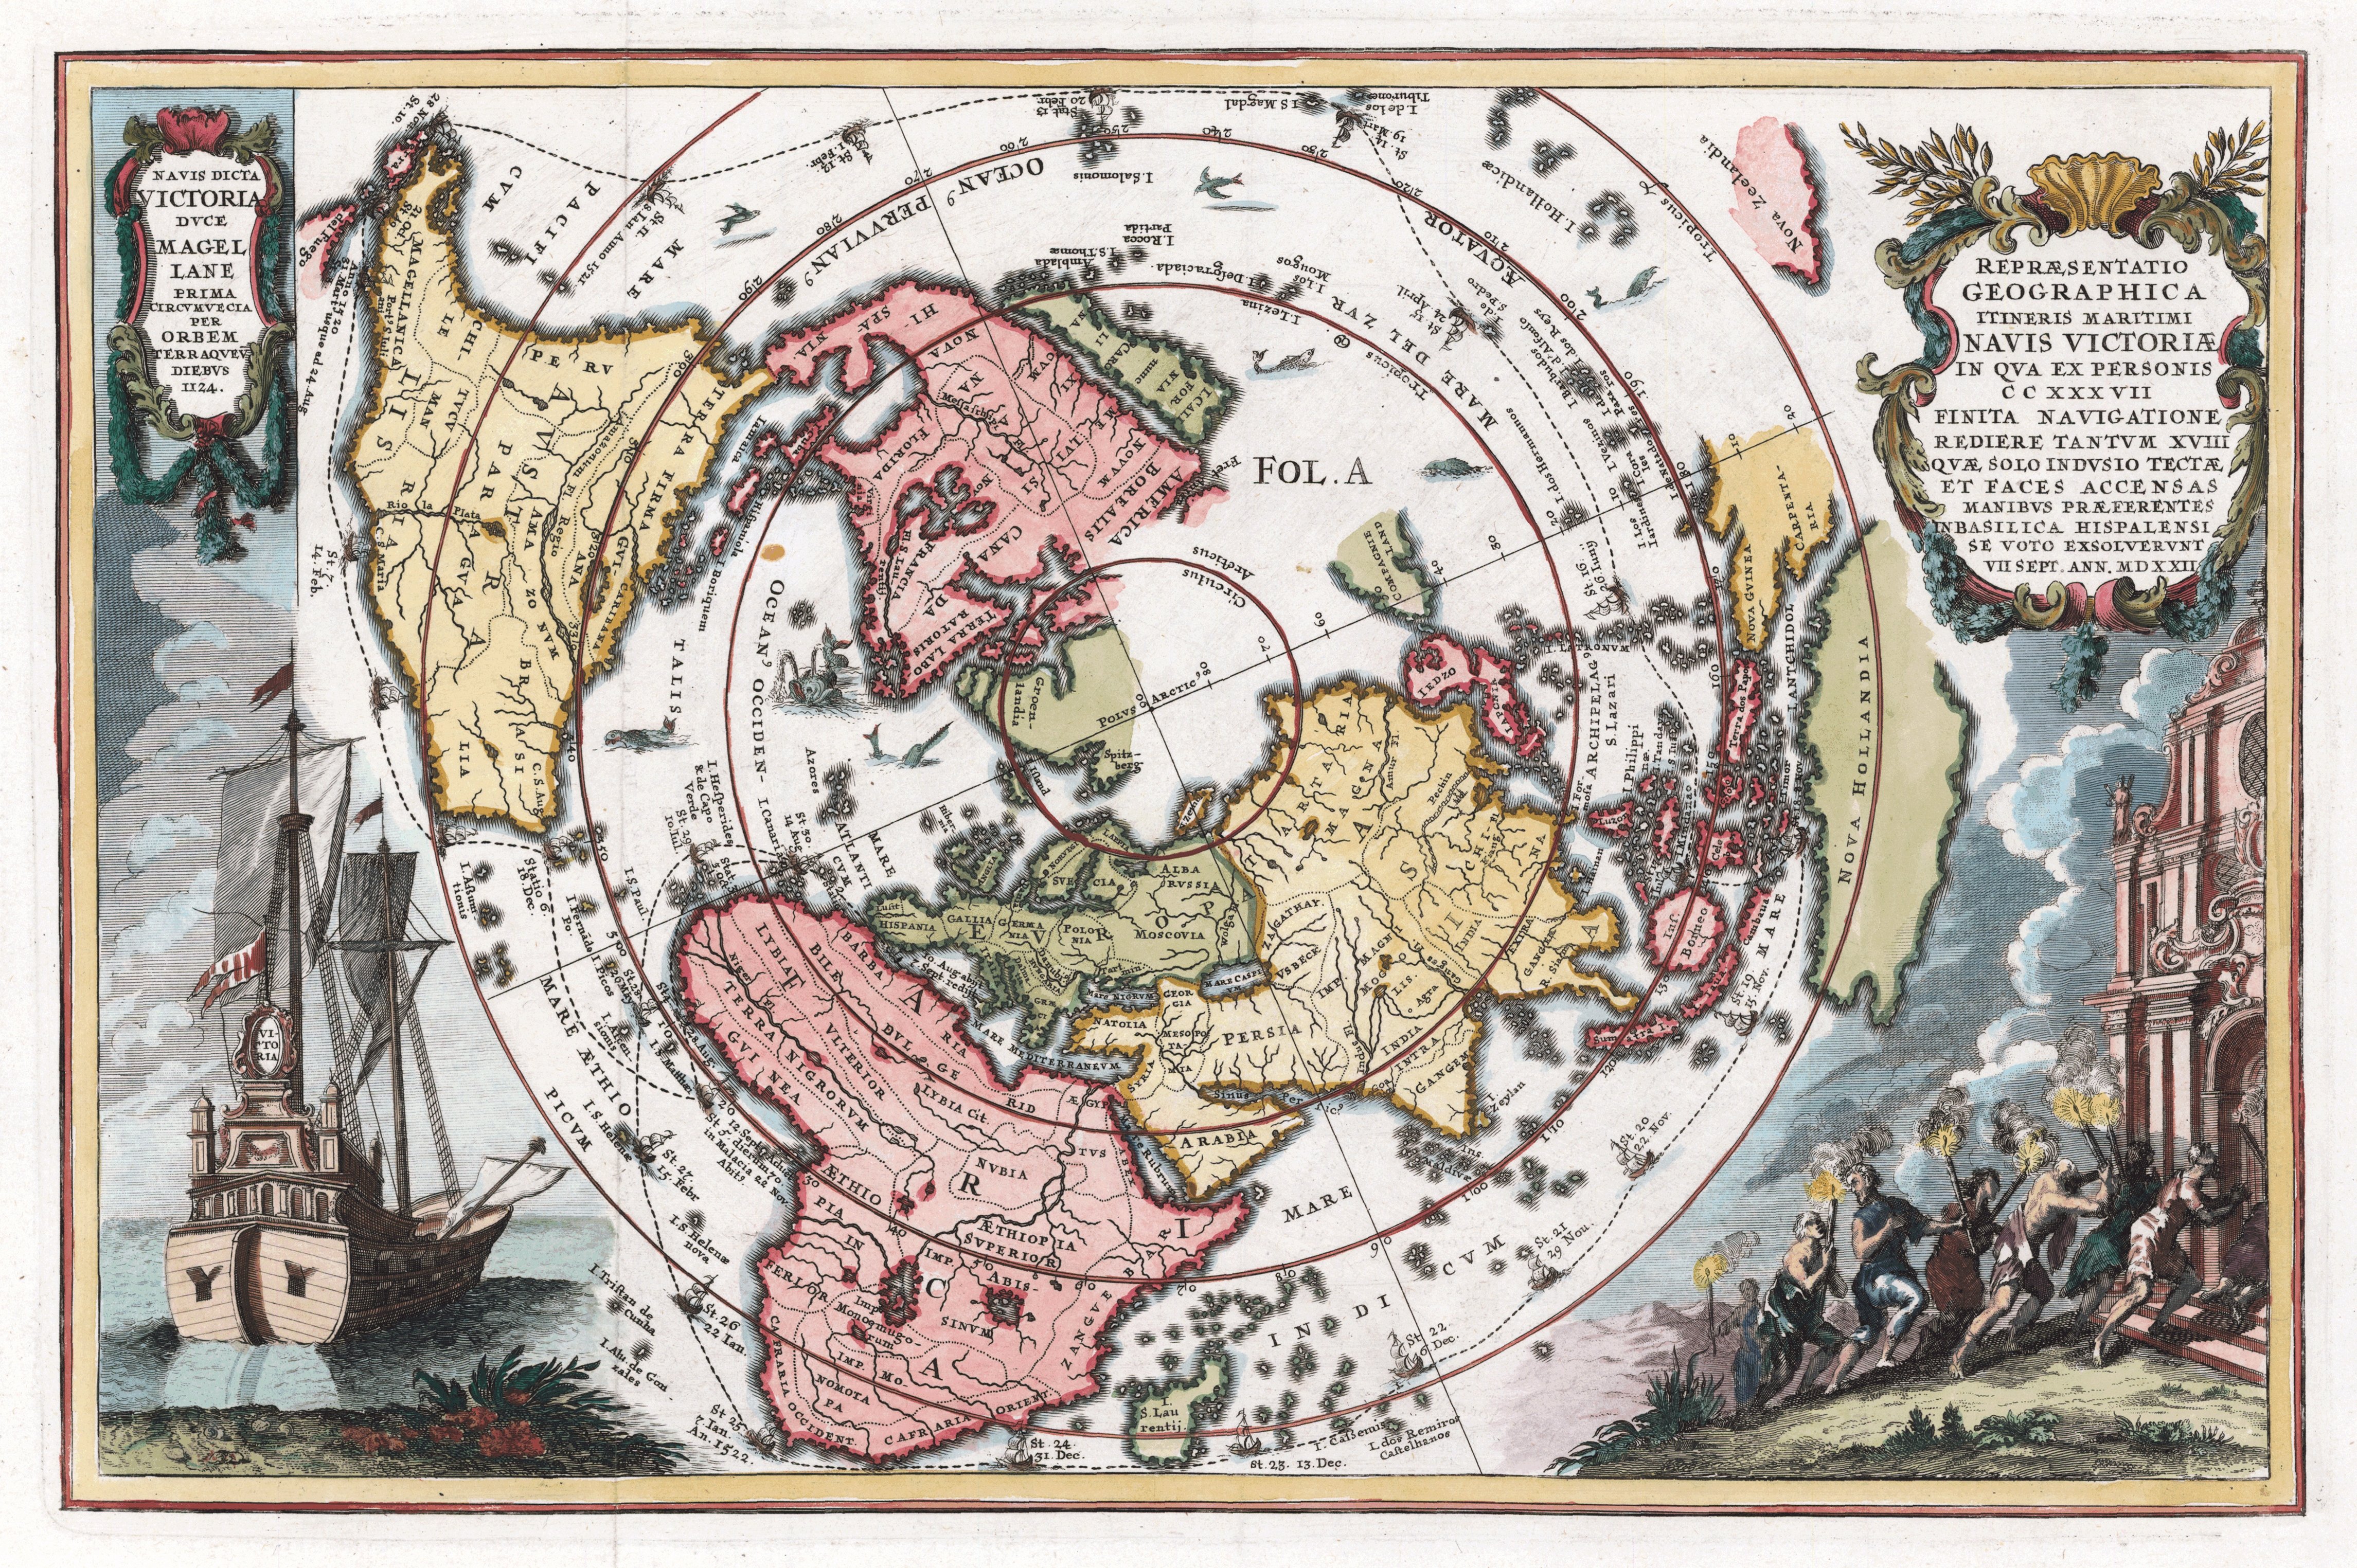 Heinrich Scherer, Magellanic world map entitled &quot;Representatio Geographica Itineris Maritimi Navis Victoriae...,&quot; using a north polar projection and showing the route of Magellan&#039;s circumnavigation. (Getty Images Photo)